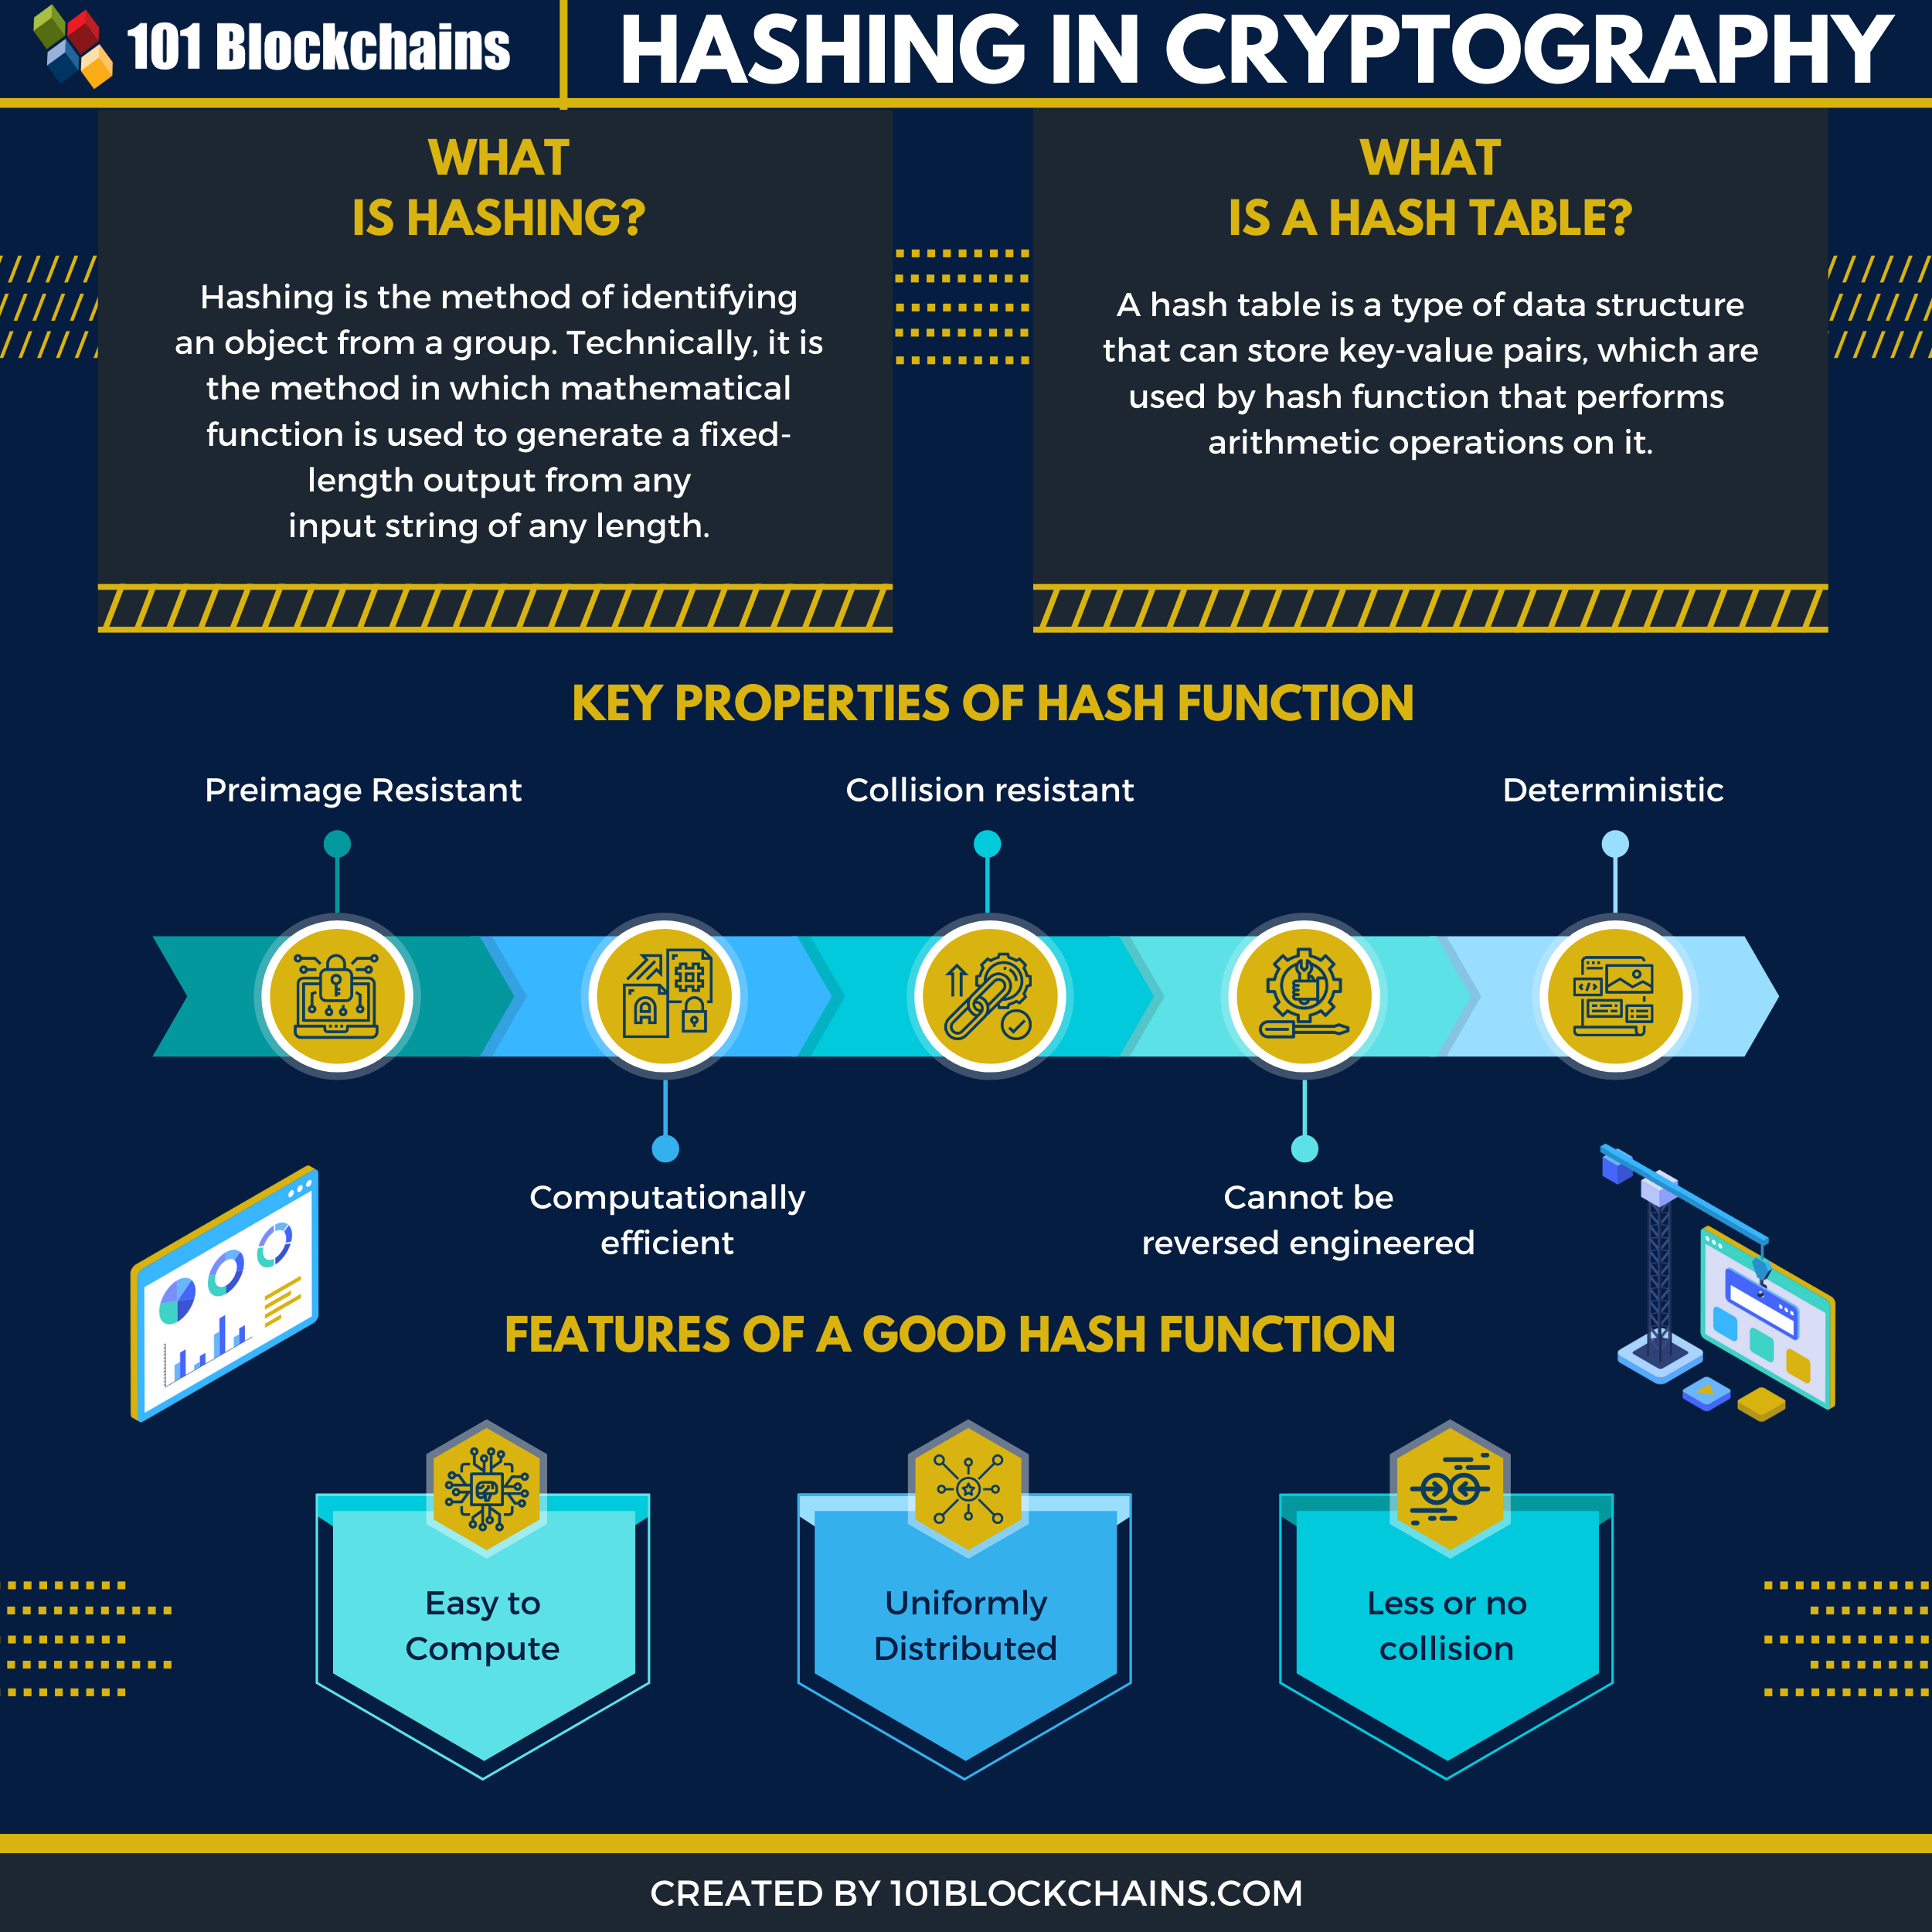 Hashing in cryptography